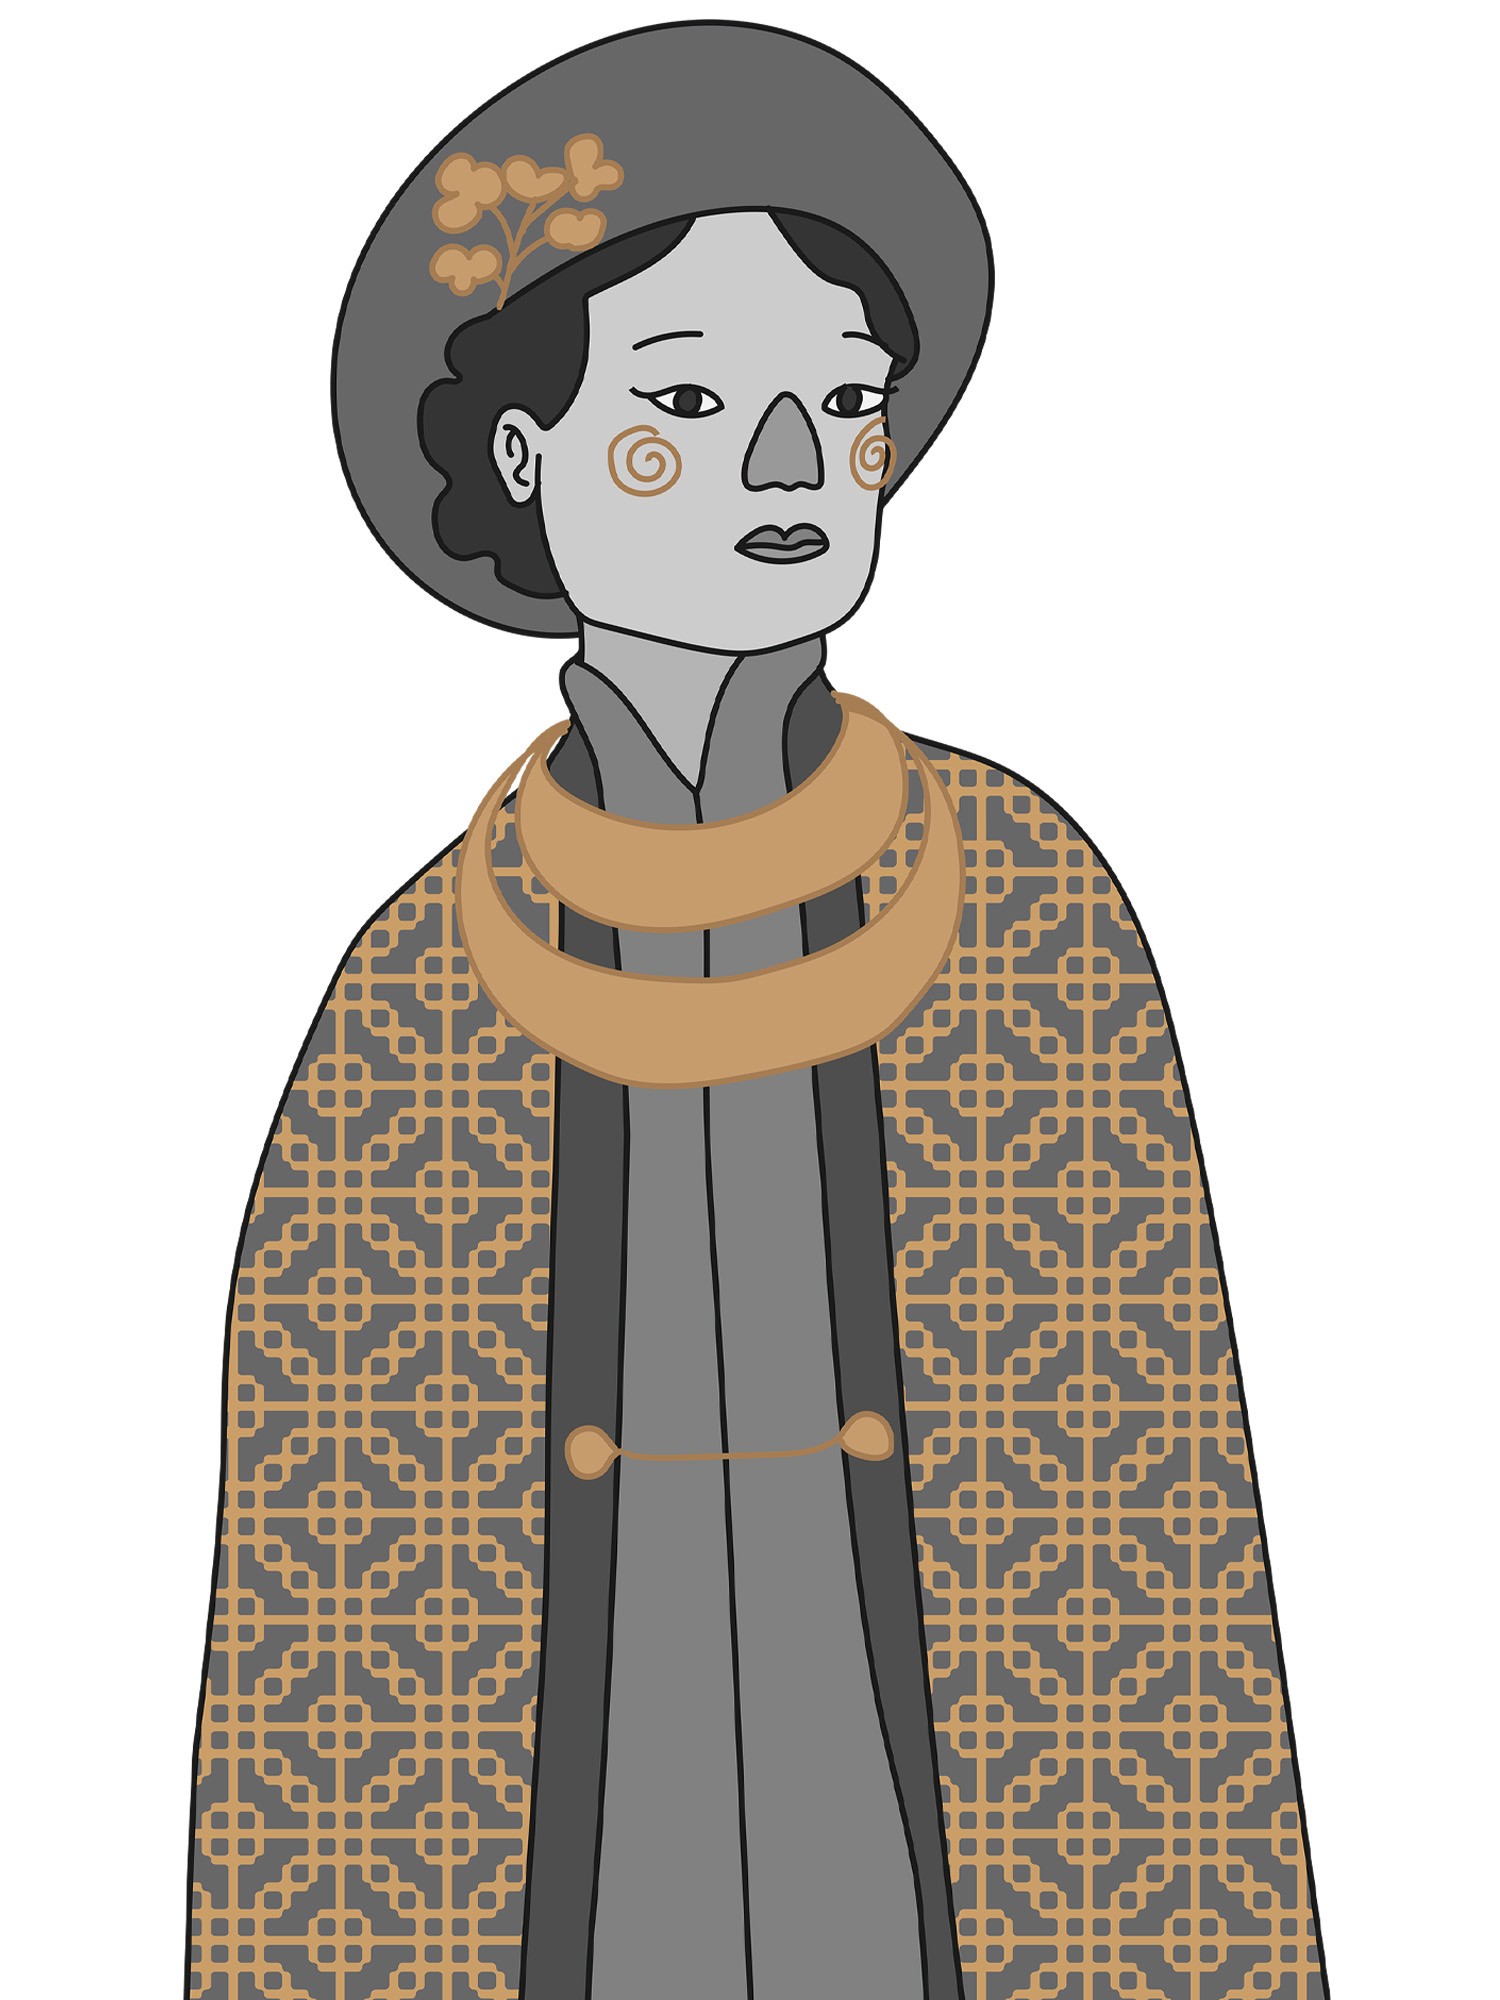 Illustrated Vietnamese woman wearing patterned clothes and a hat